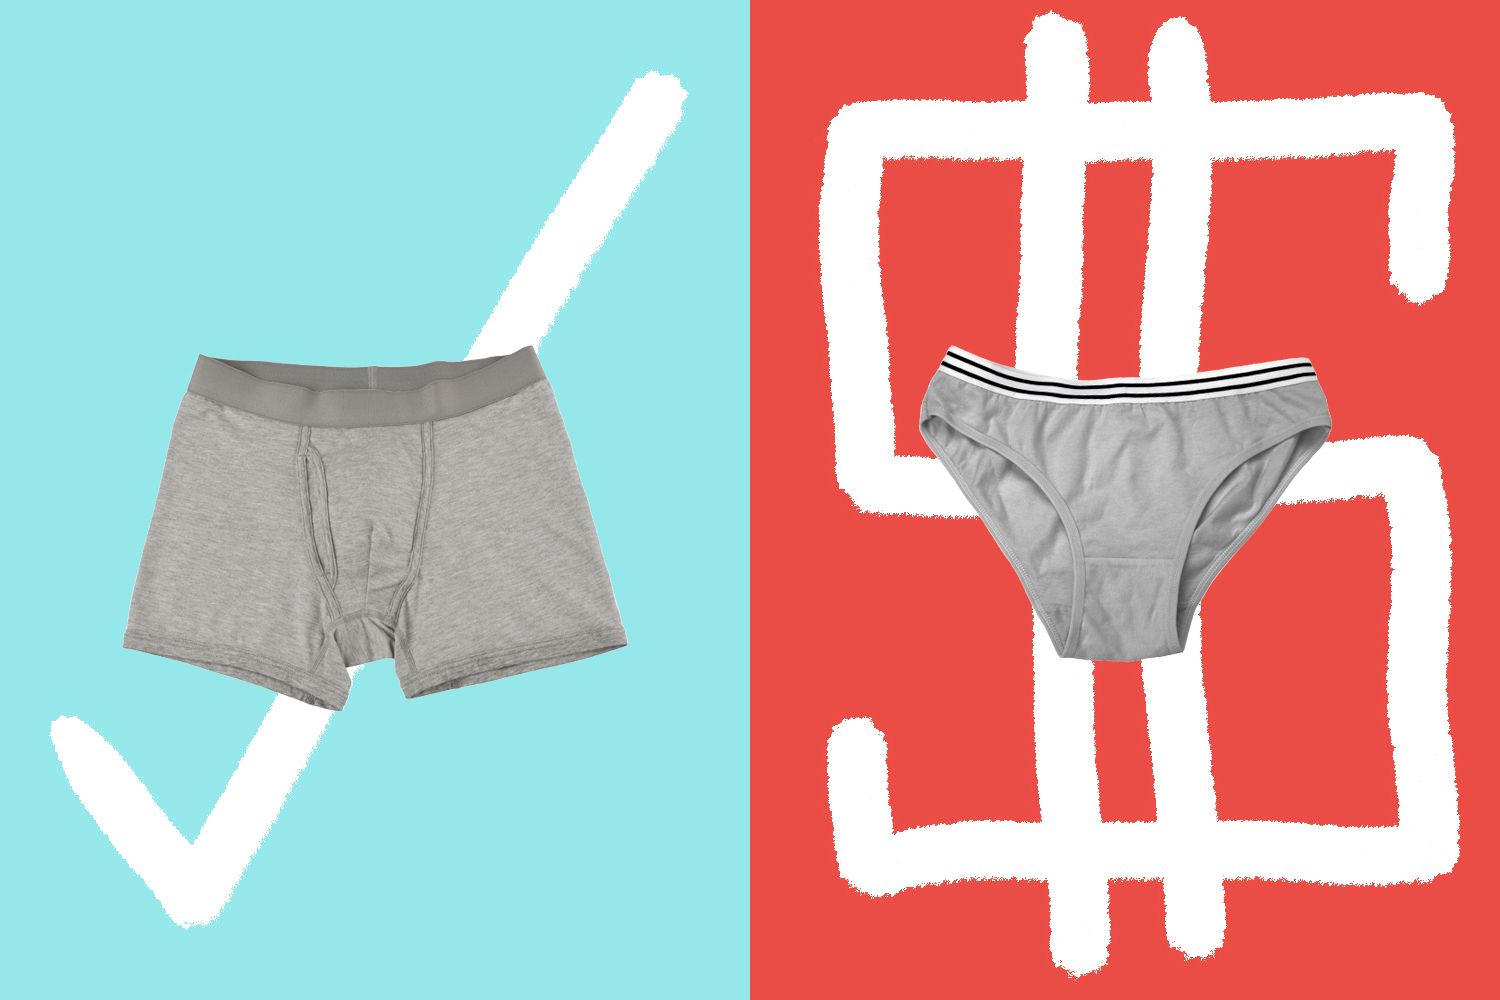 Selling underwear on the internet – Iowa State Daily